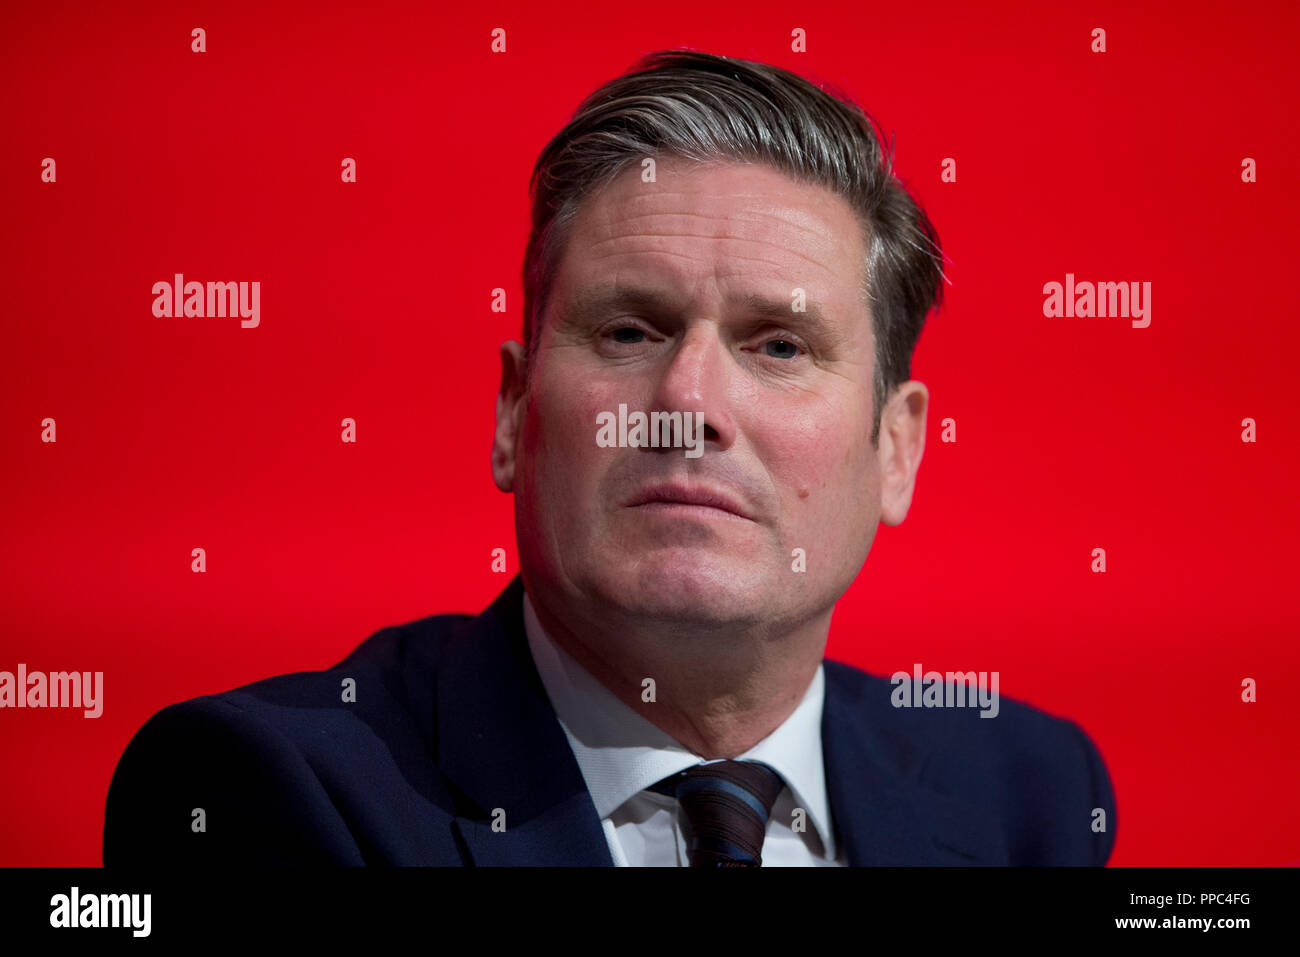 Liverpool, UK. 25th September 2018. Keir Starmer, Shadow Secretary of State for Exiting the European Union and Labour MP for Holborn and St Pancras attends the Labour Party Conference in Liverpool. © Russell Hart/Alamy Live News. Stock Photo